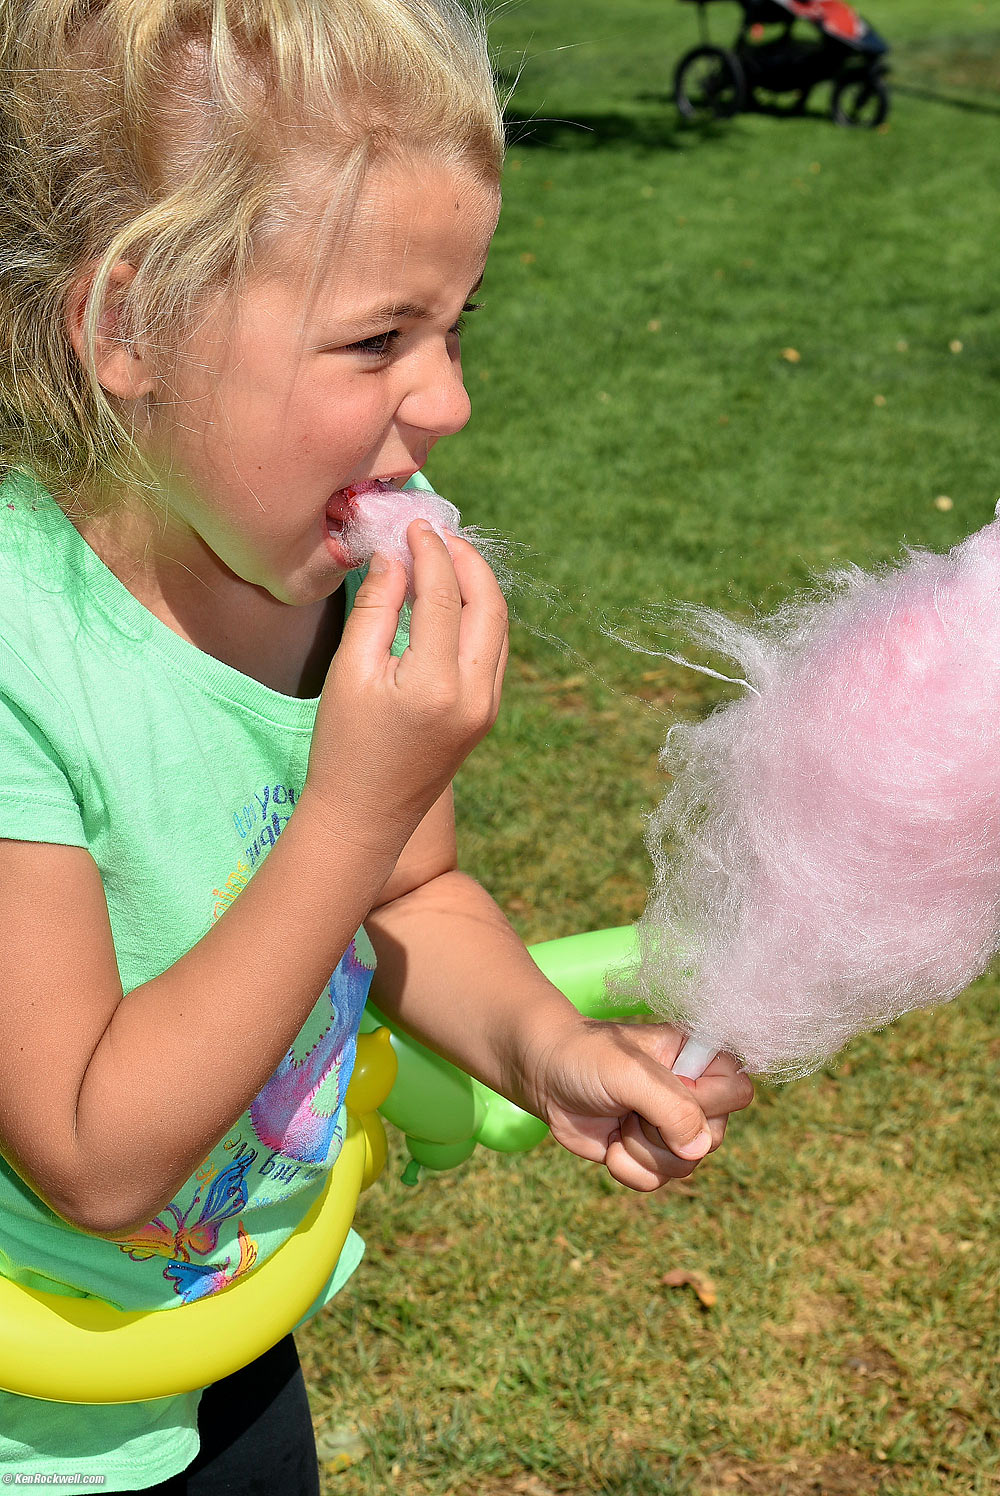 Noni also got cotton candy for Katie